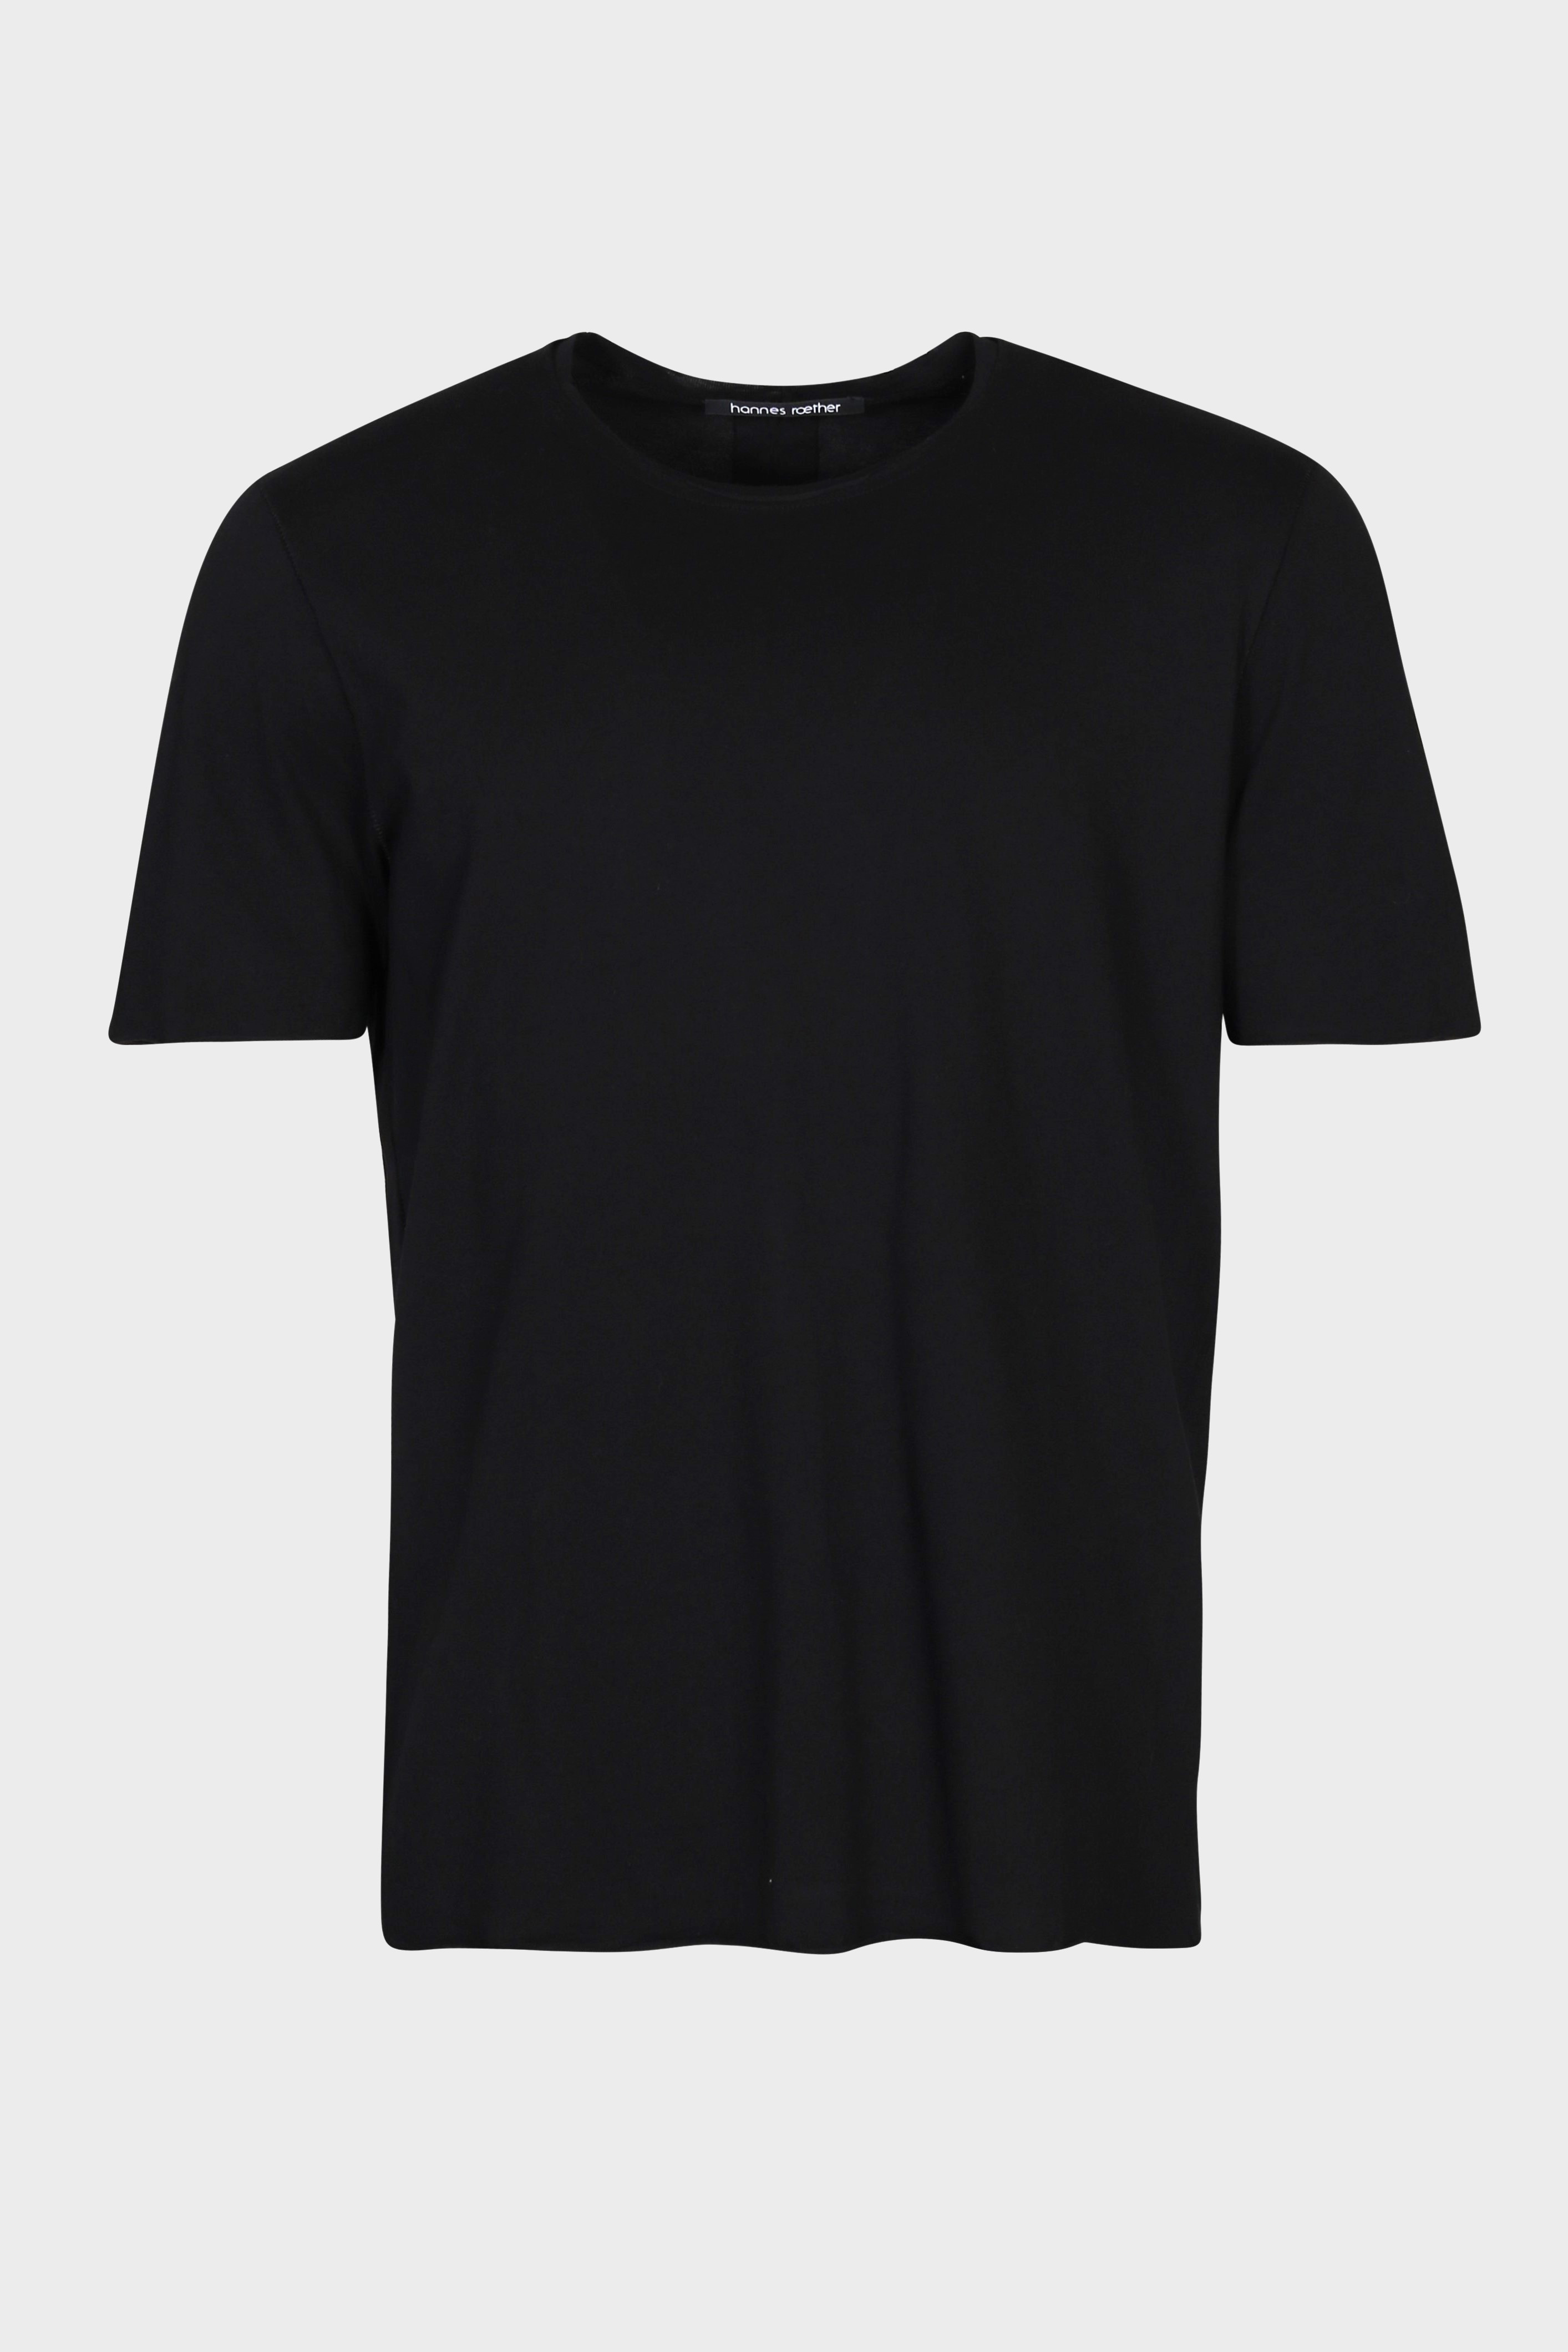 HANNES ROETHER T-Shirt in Black 2XL